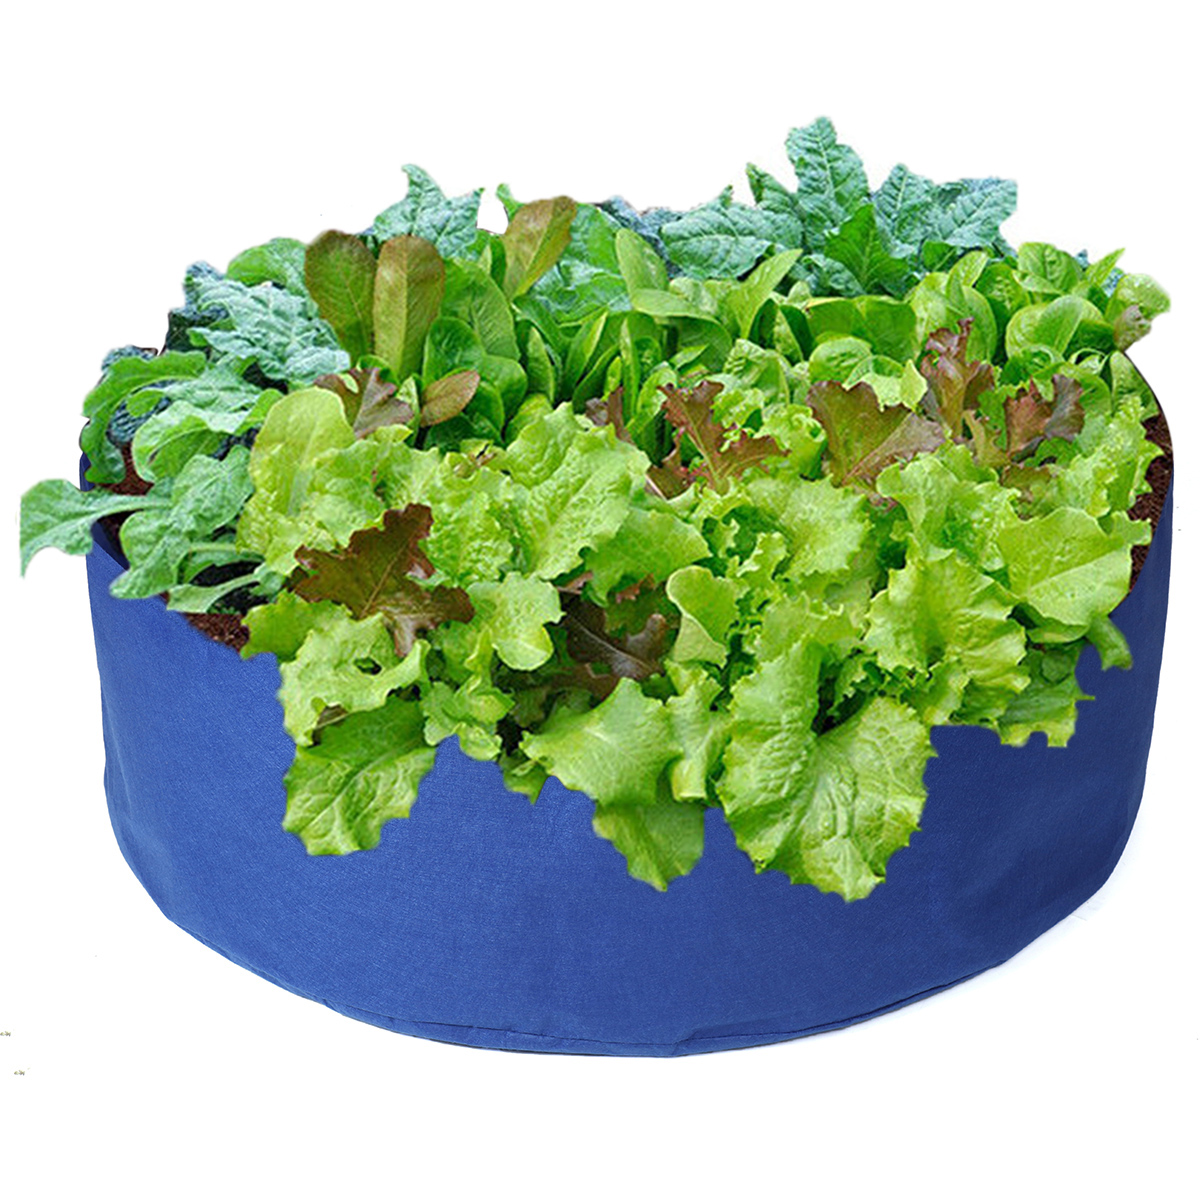 Foldable Round Planting Container Nursery Flower Planter Vegetable Flowers Planting Grow Bag